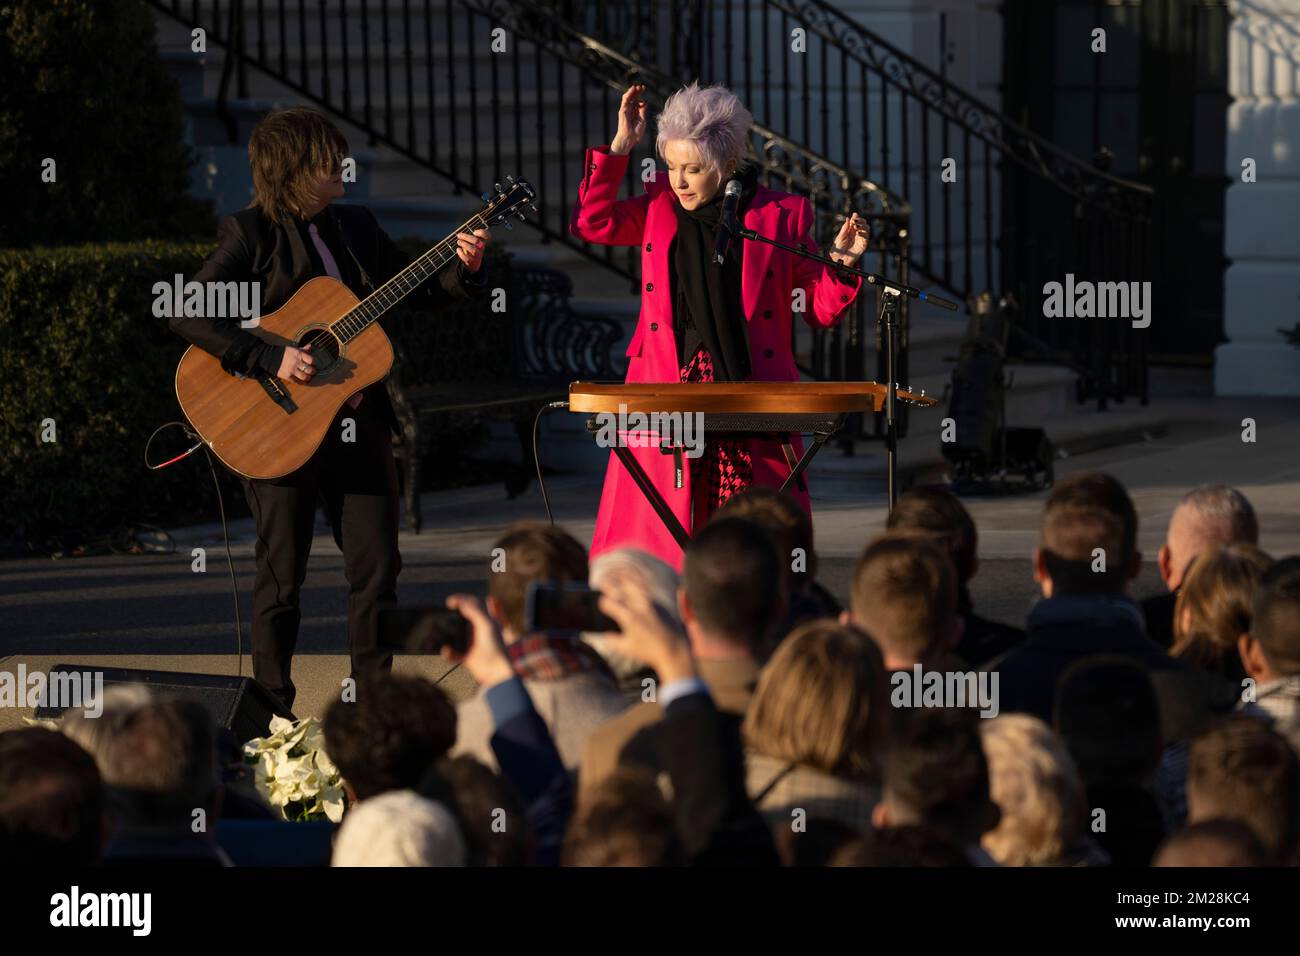 Singer Cyndi Lauper and guitarist Alex Nolan perform in a ceremony with US President Joe Biden to sign the Respect for Marriage Act on the South Lawn of the White House in Washington, DC on December 13, 2022. Credit: Chris Kleponis/Pool via CNP Stock Photo